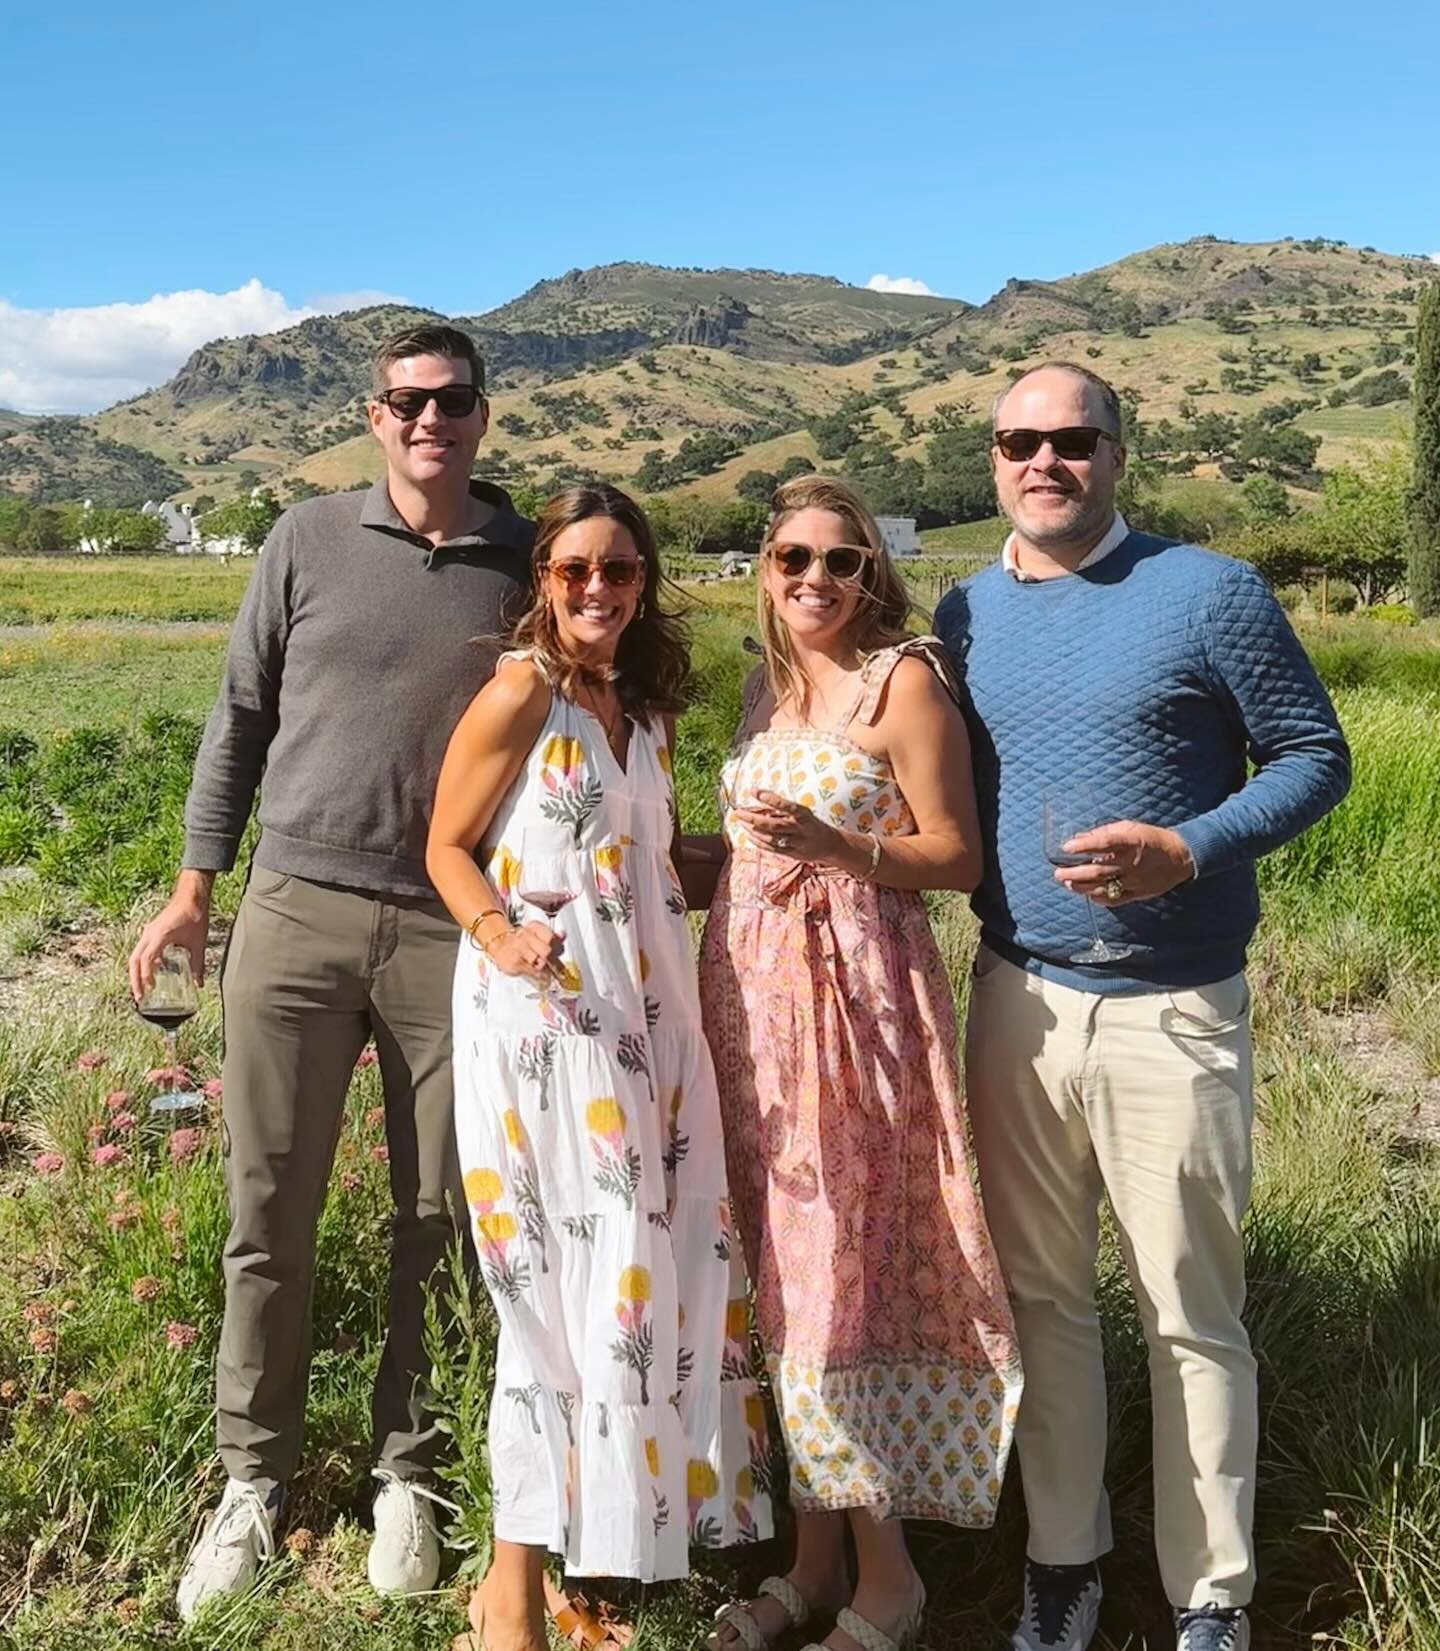 Great friends, good vibes 🍷 See you next year, Napa.

Our favorites this trip:
@hotelyountville 
@closduval 
@lacalendamex 
@adhoc_addendum 
@aubergedusoleil 
@schramsberg (didn&rsquo;t go this time but the best bubbles)
@bouchon_bakery 
@modelbaker